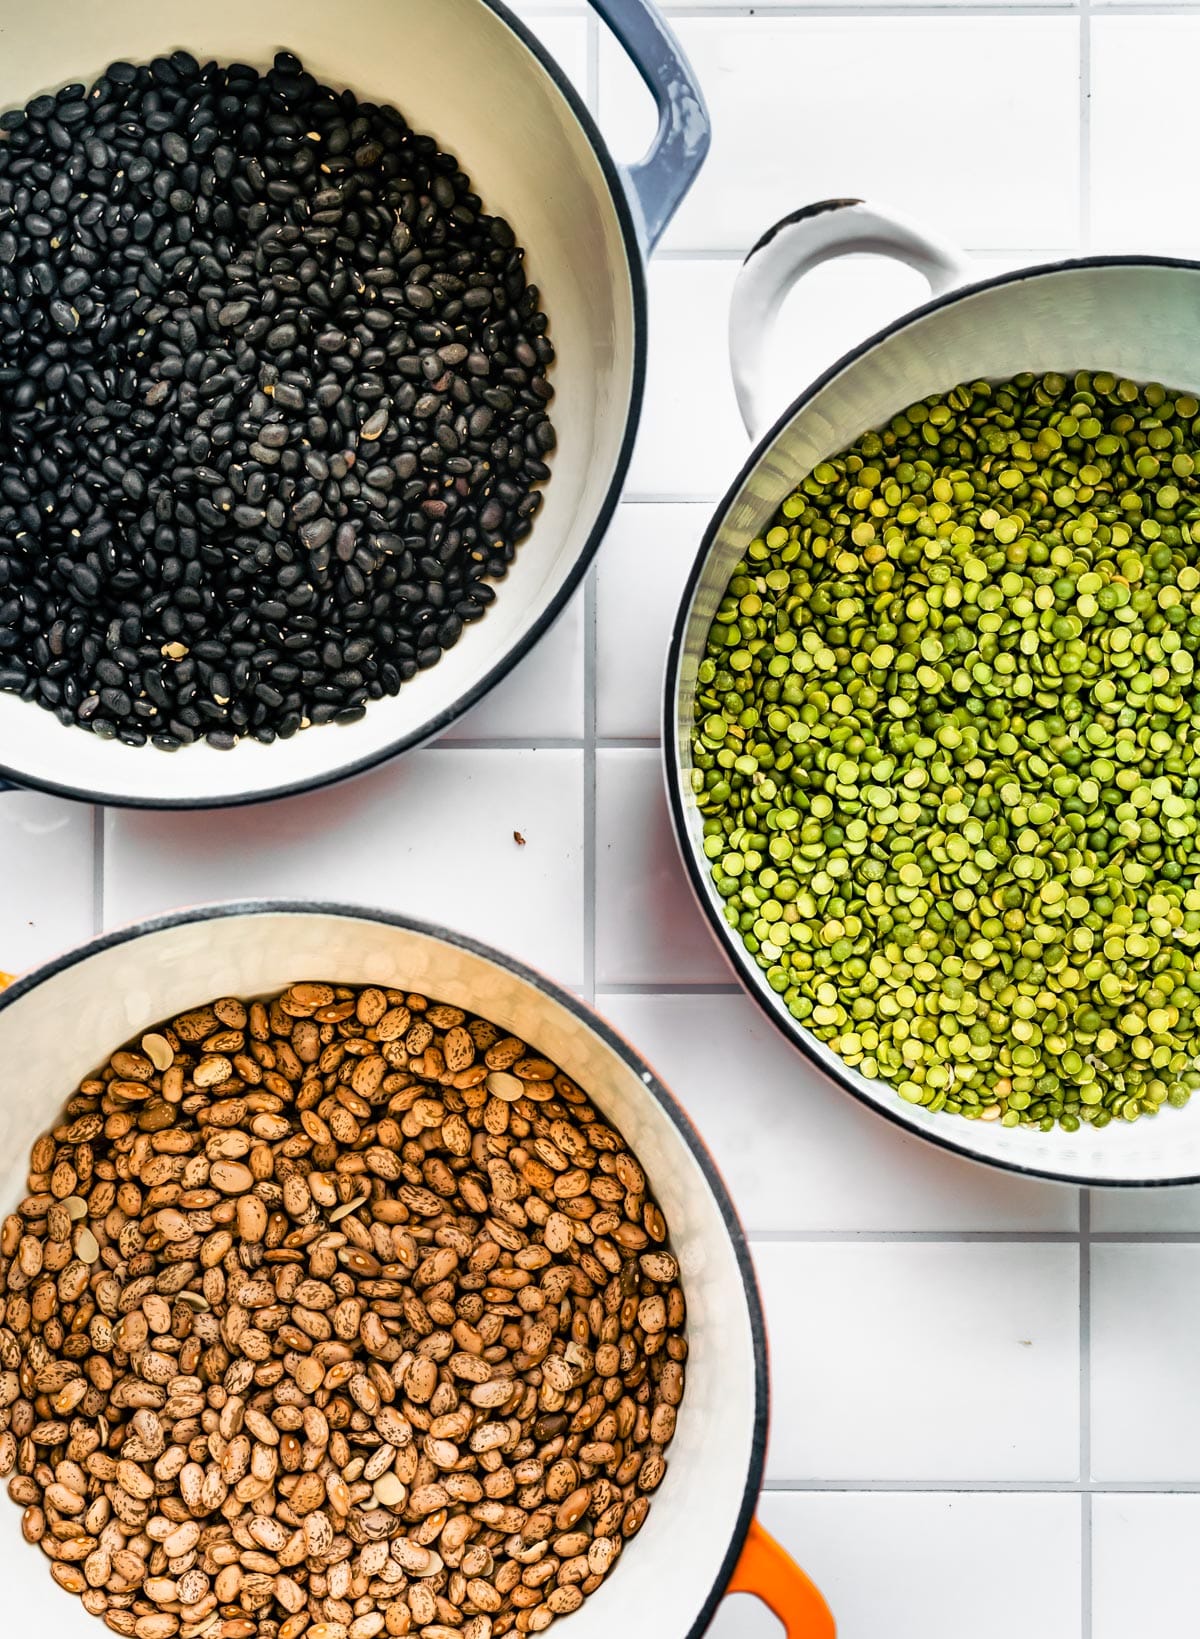 Overhead shot of Black Beans, Green Lentils, and Pinto Beans all in separate pots on counter top.